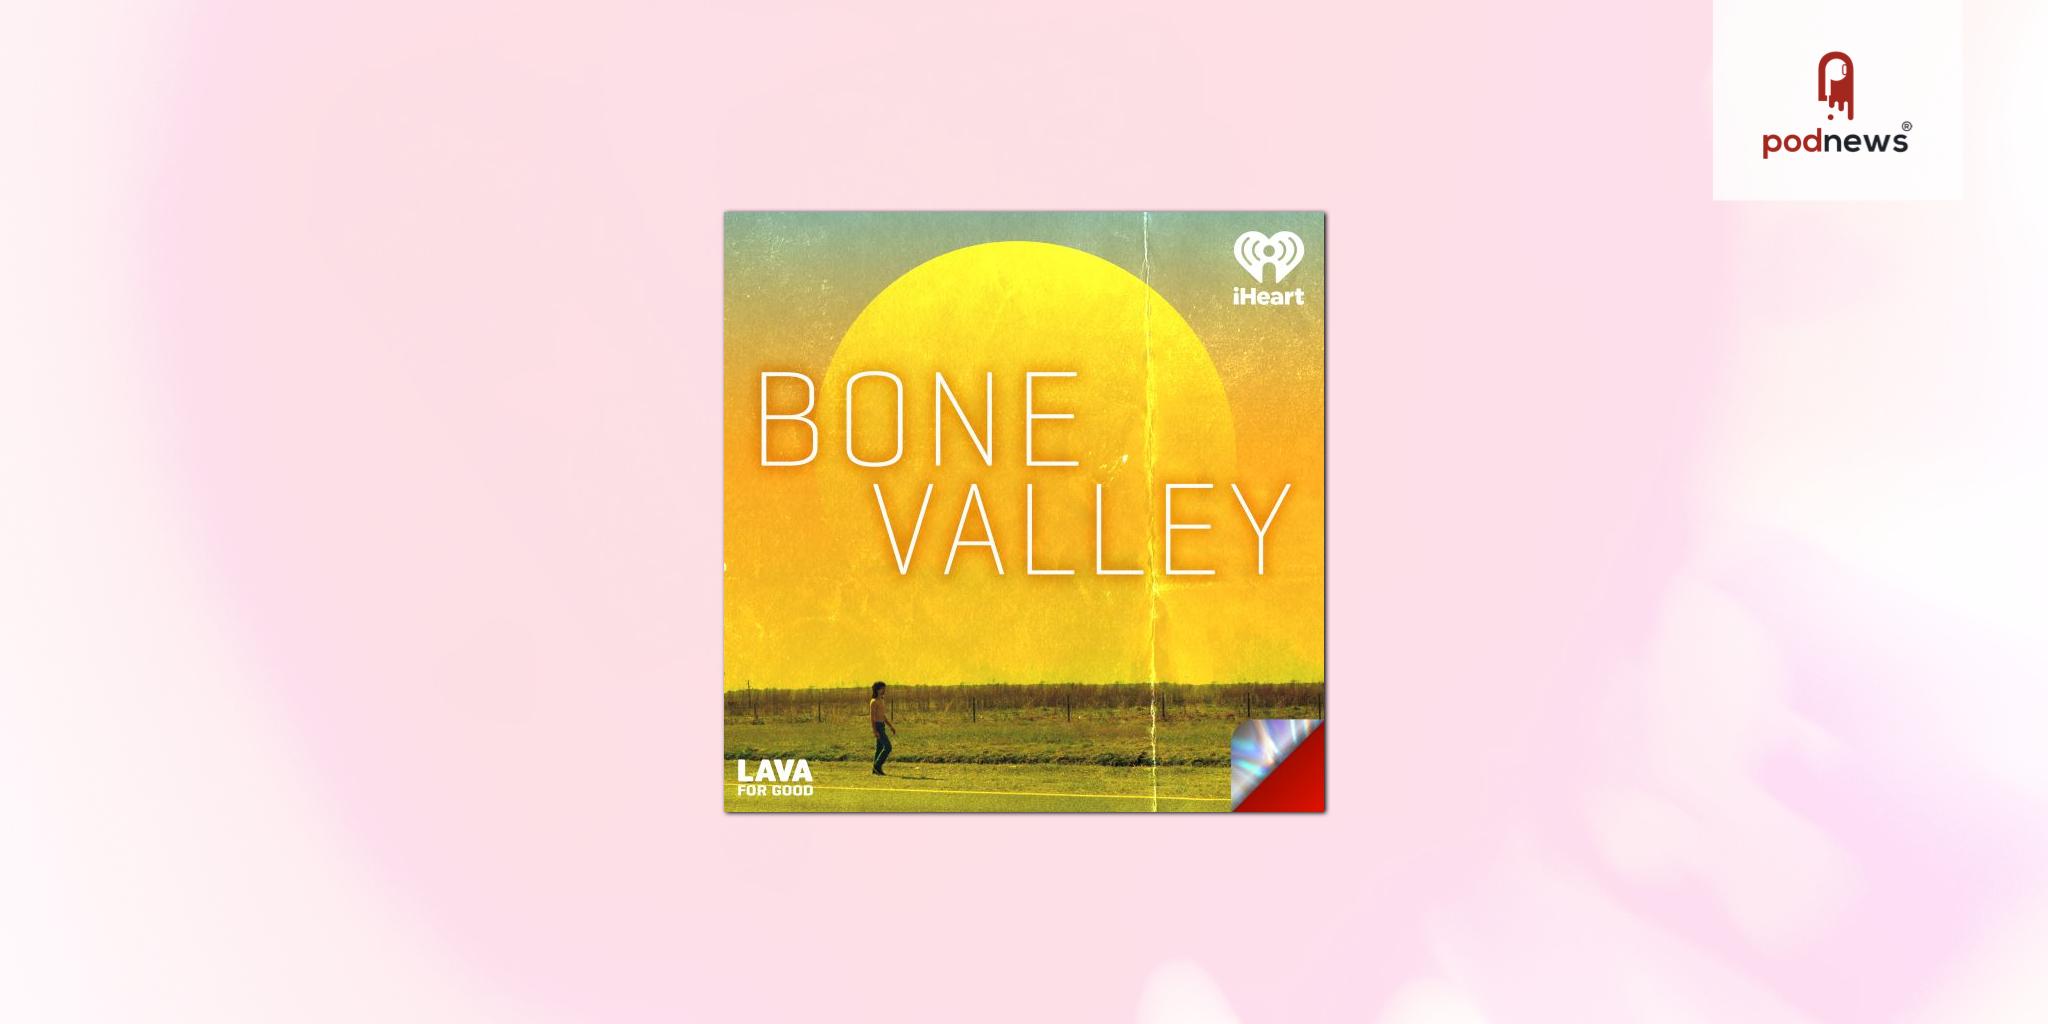 Award Winning Podcast Bone Valley To Become Scripted Television Series